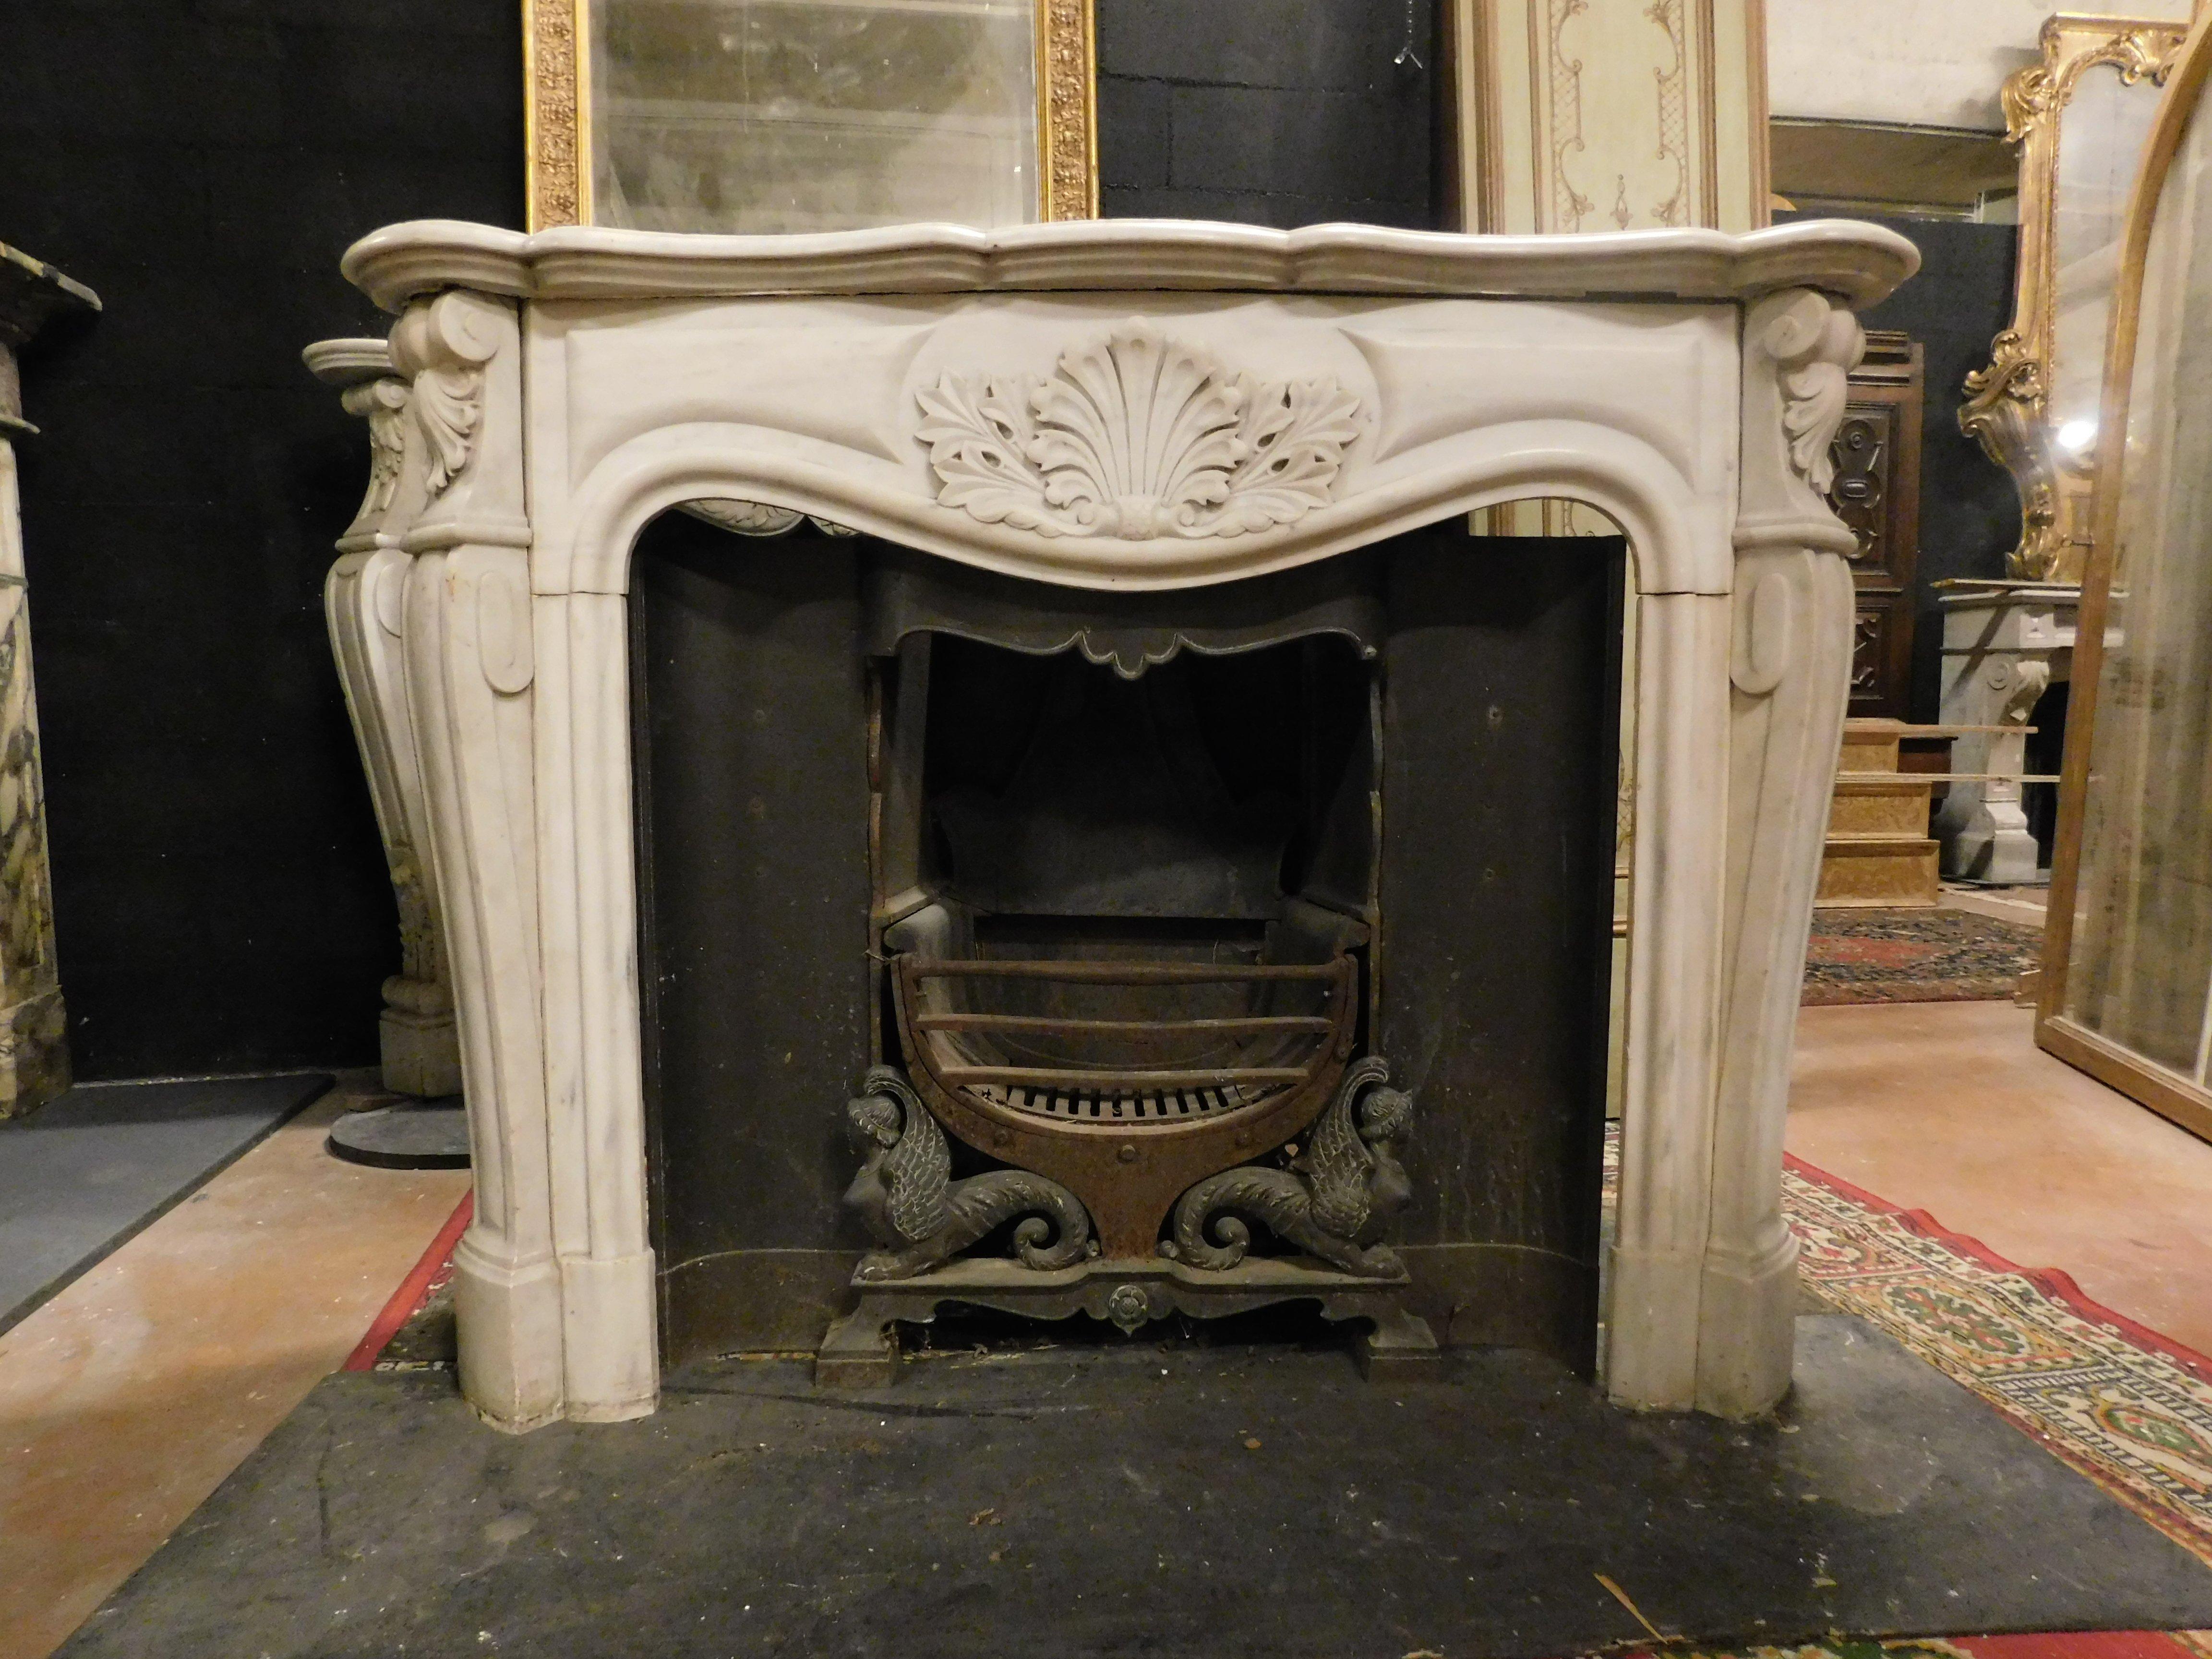 Ancient fireplace mantle in white Carrara marble, richly carved with leaves on the sides and central shell, built in the 18th century for an important noble palace in France.
Not including interior (please ask if available, with additional price),